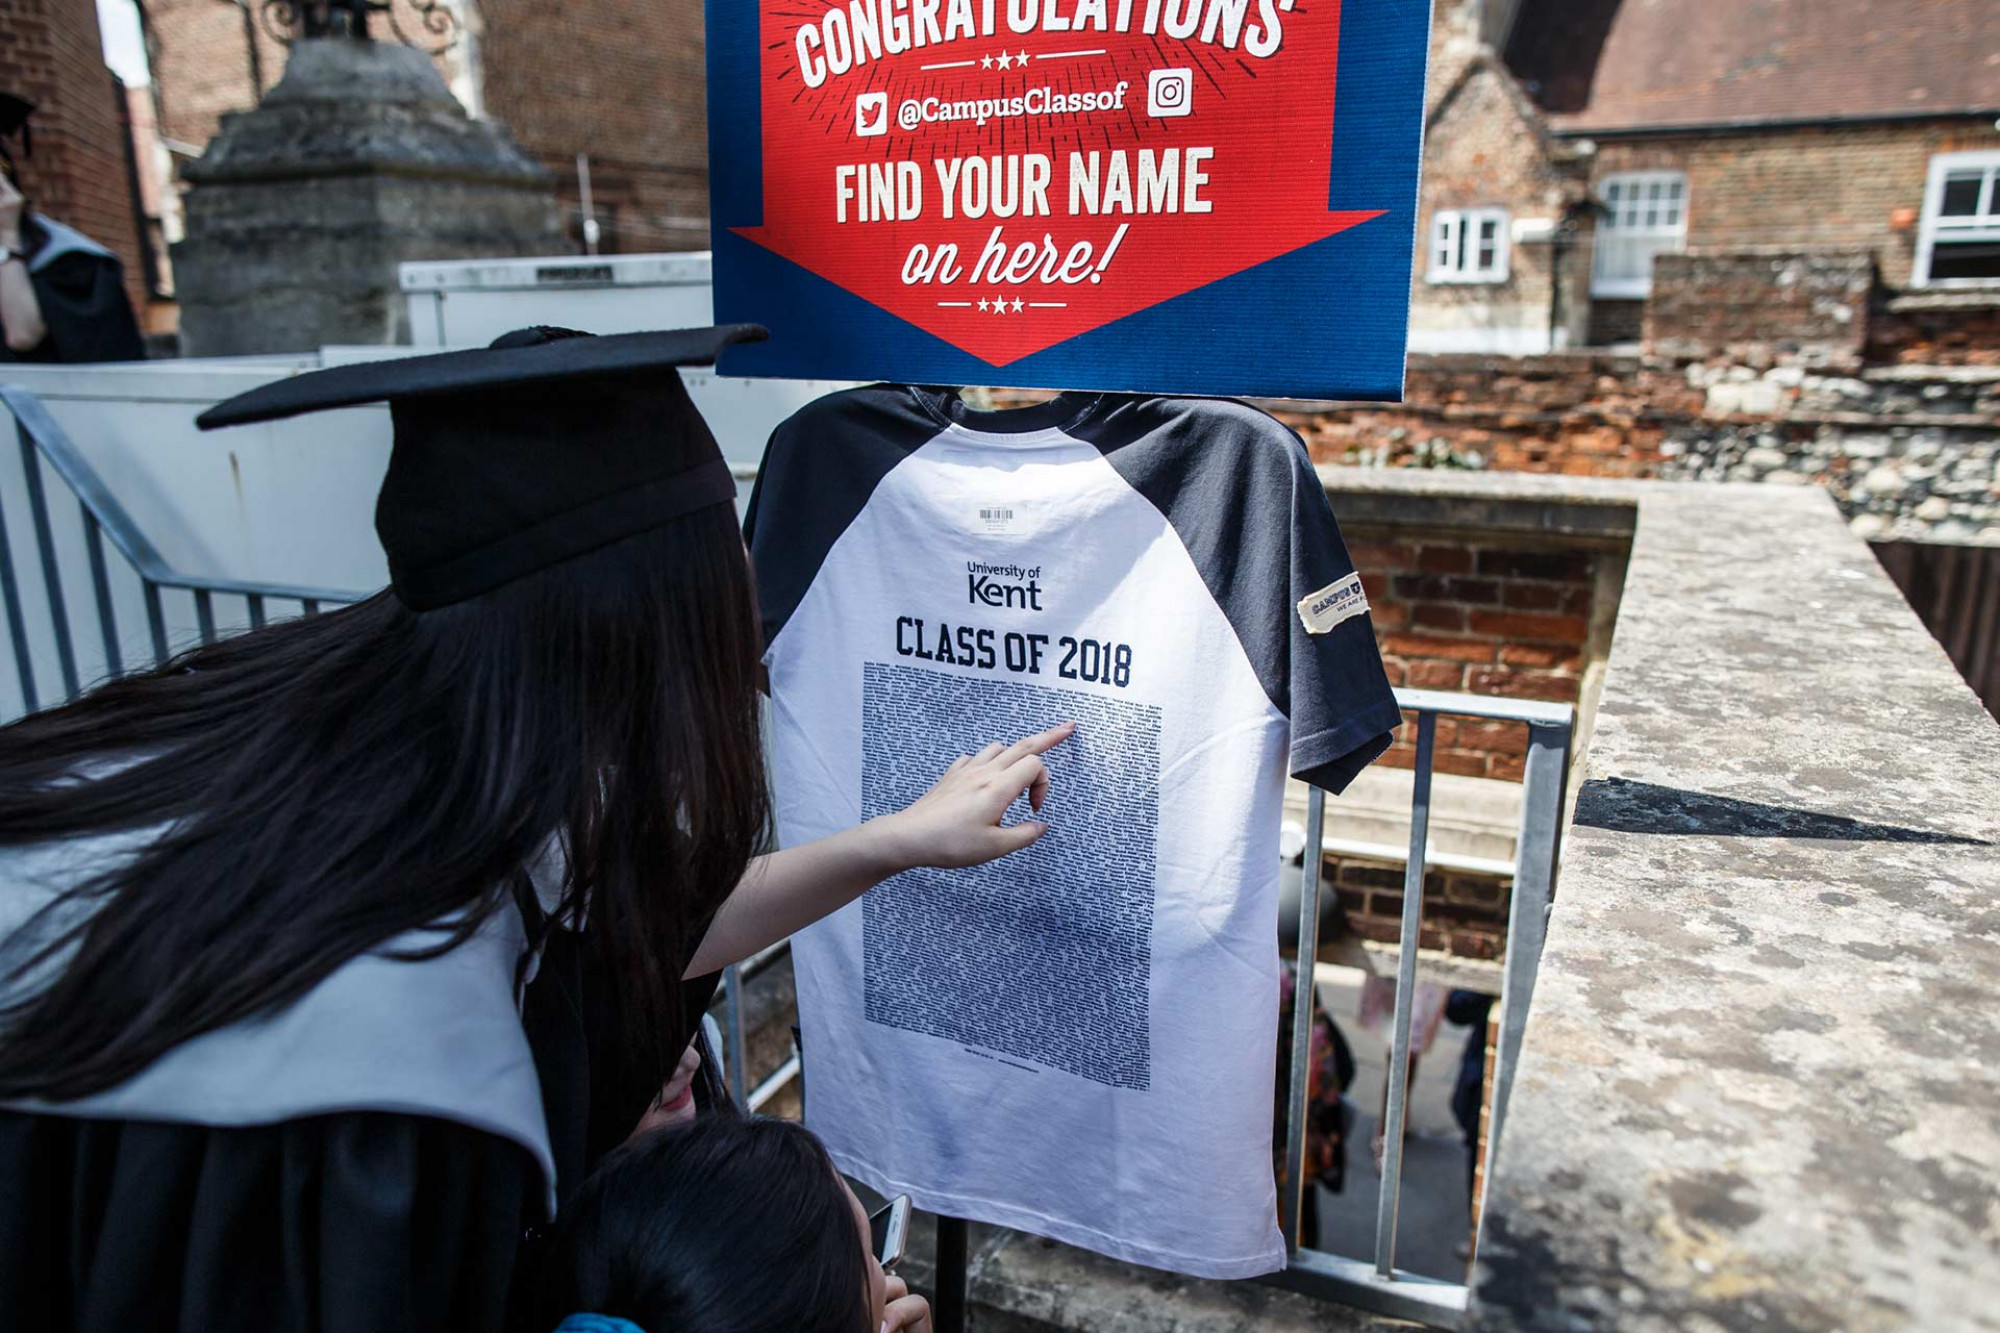 A graduand looking at a 'Class of 2018' t-shirt for their name.